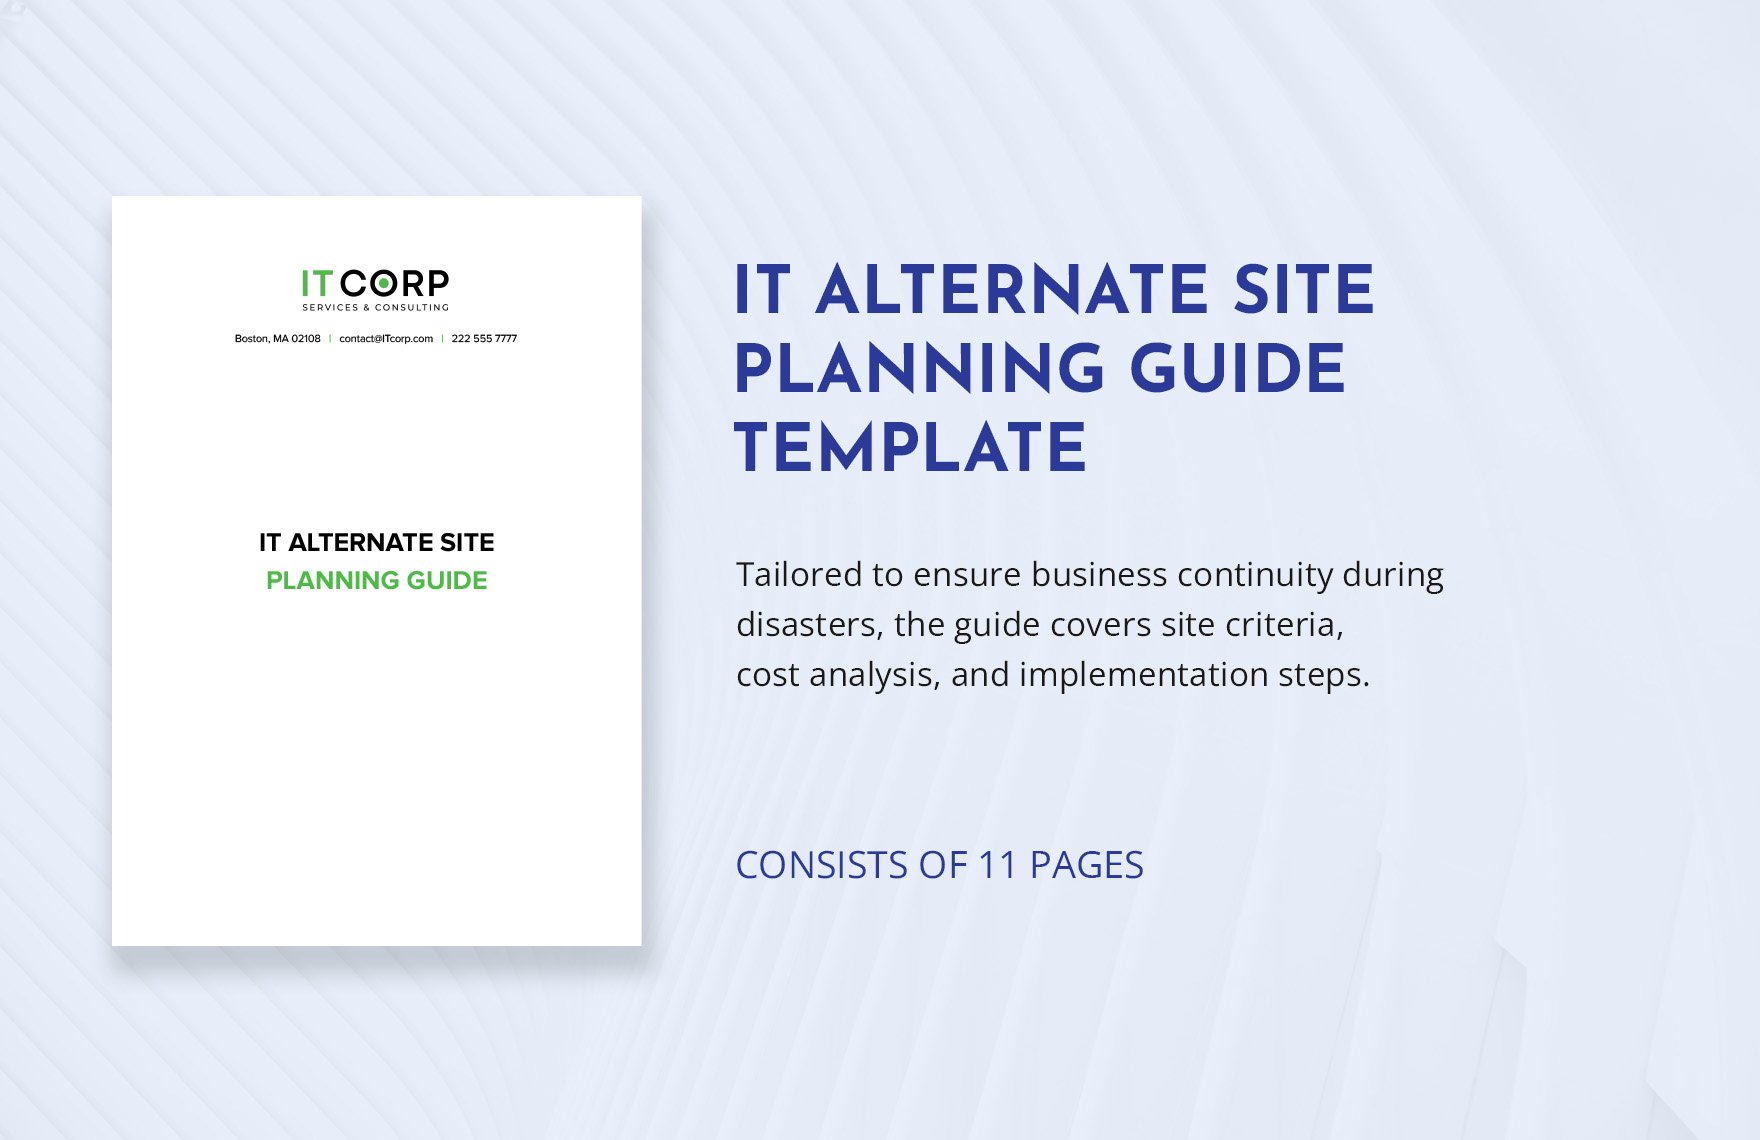 IT Alternate Site Planning Guide Template